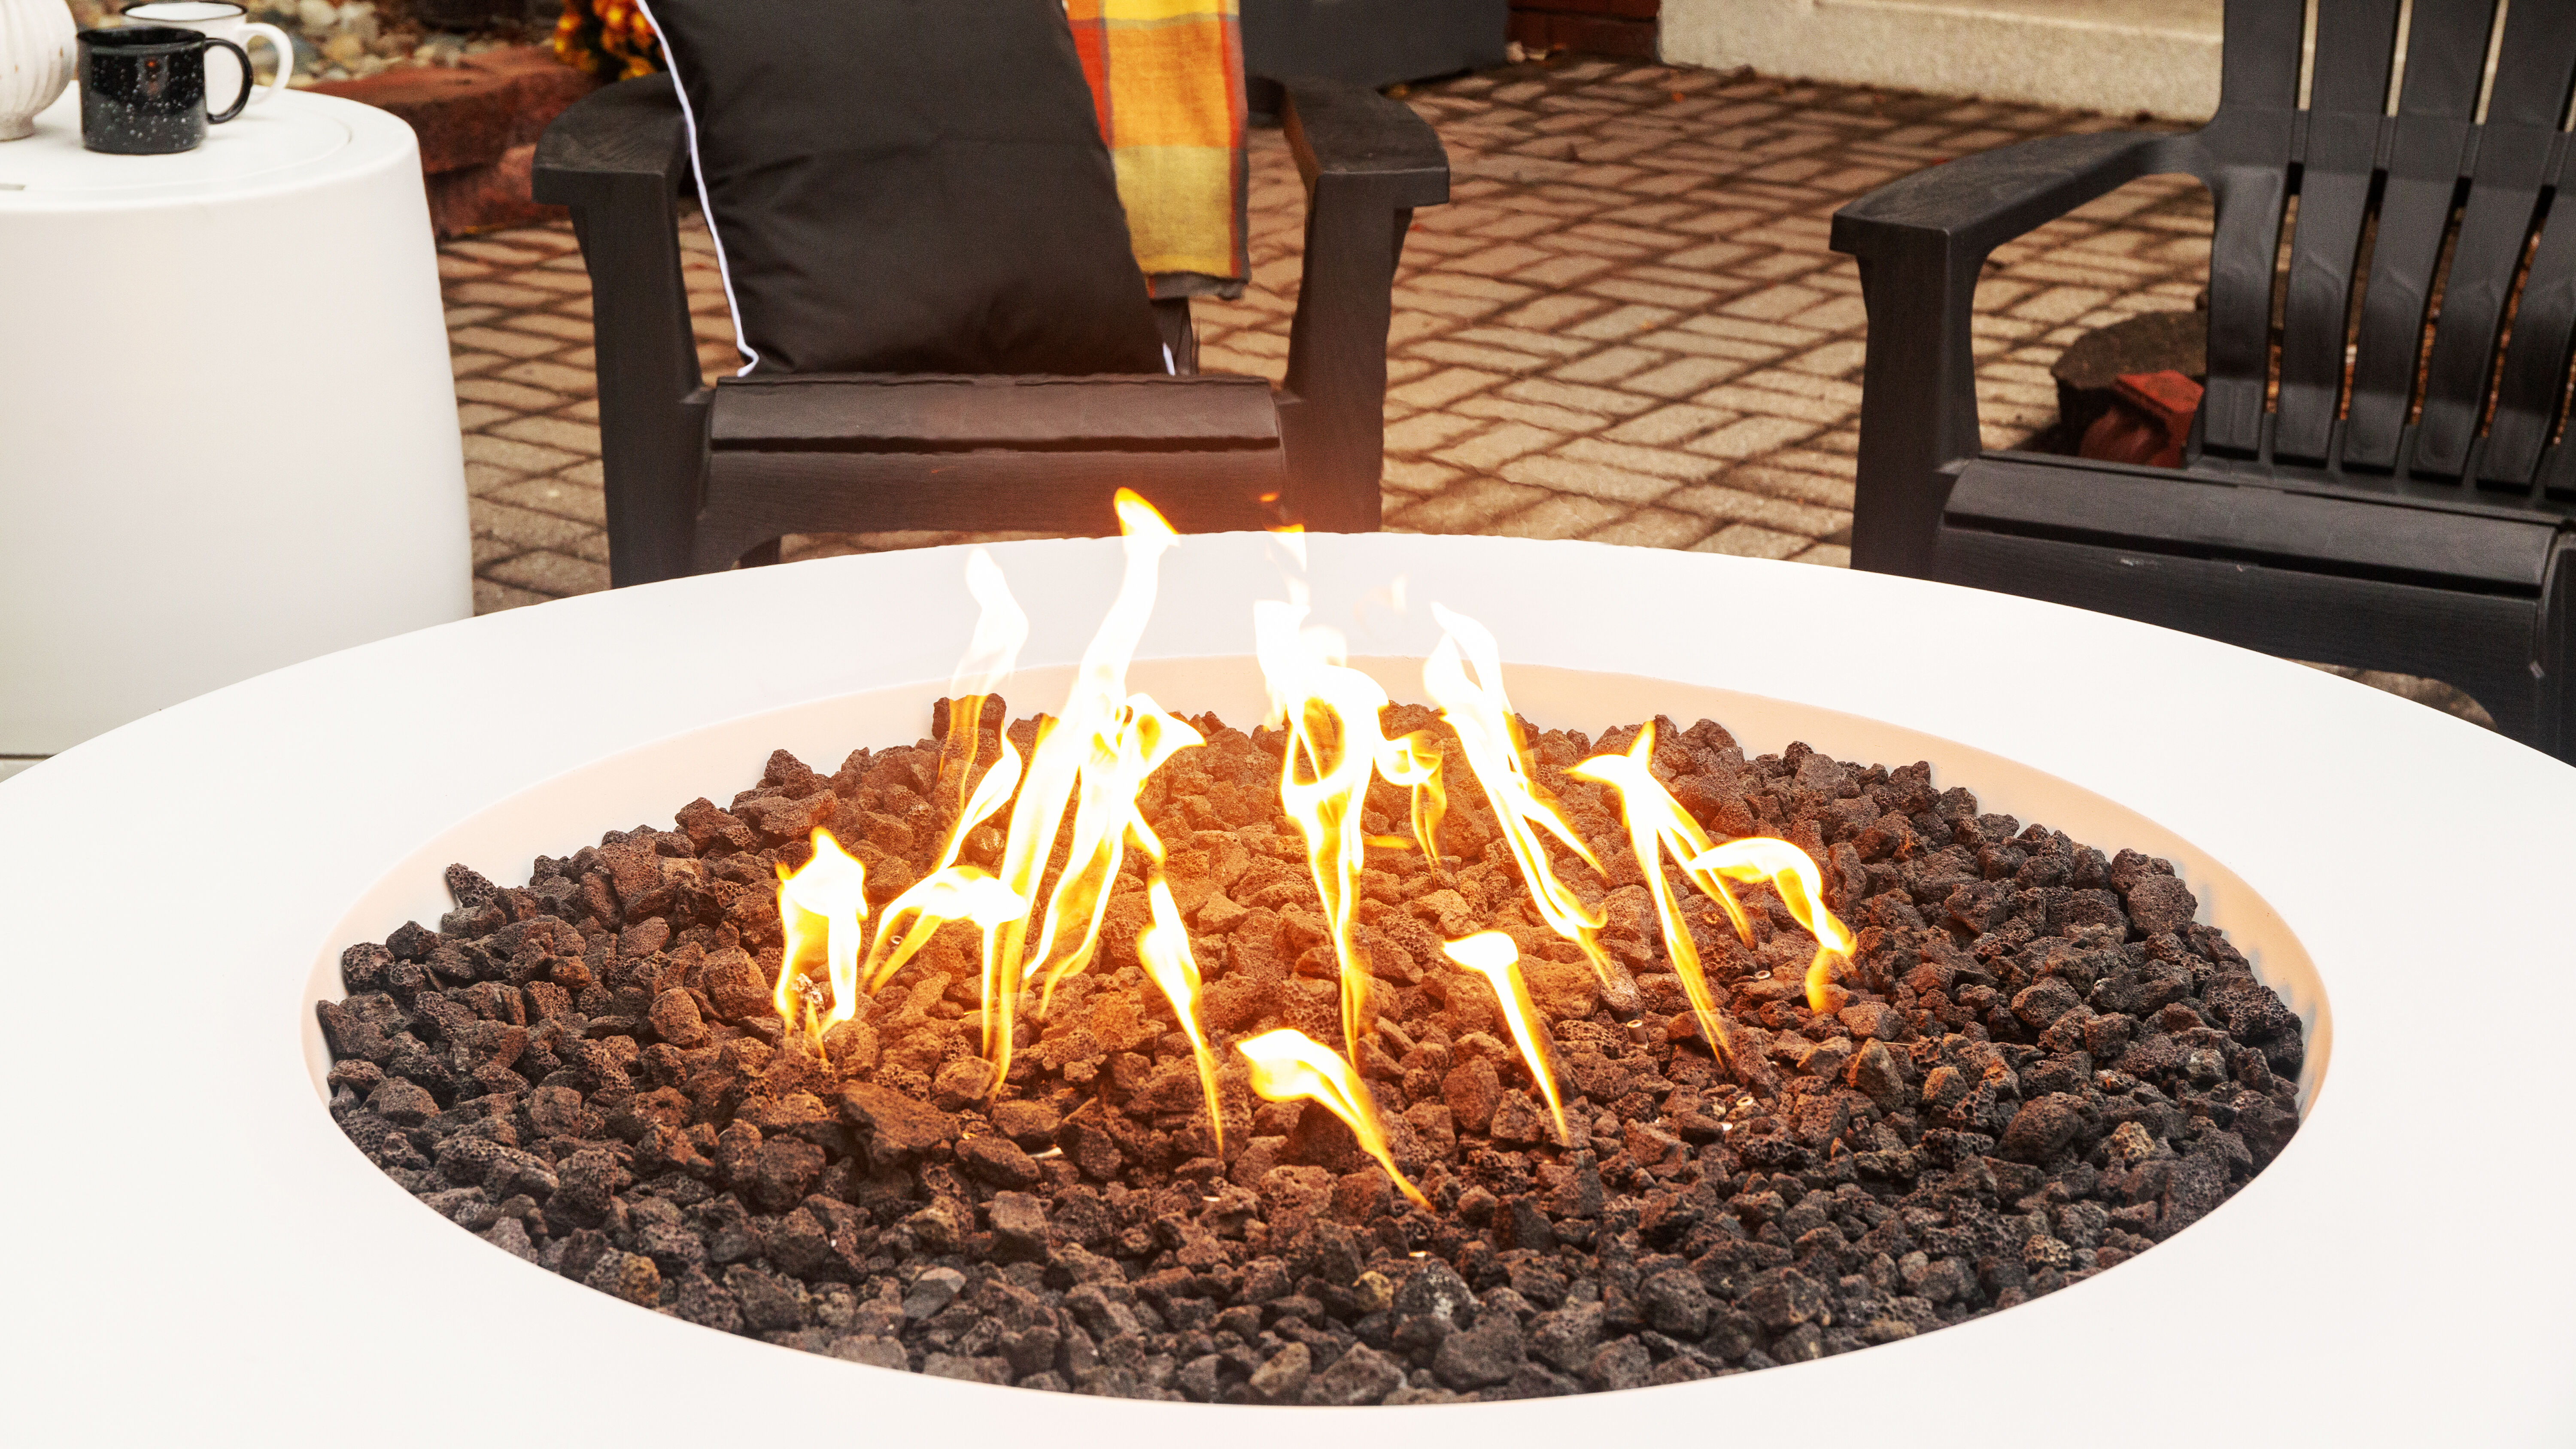 A close-up view of a white, 36-inch Tondo gas fire pit from FlameCraft with black lava rock media and an HPC gas fire pit burner.